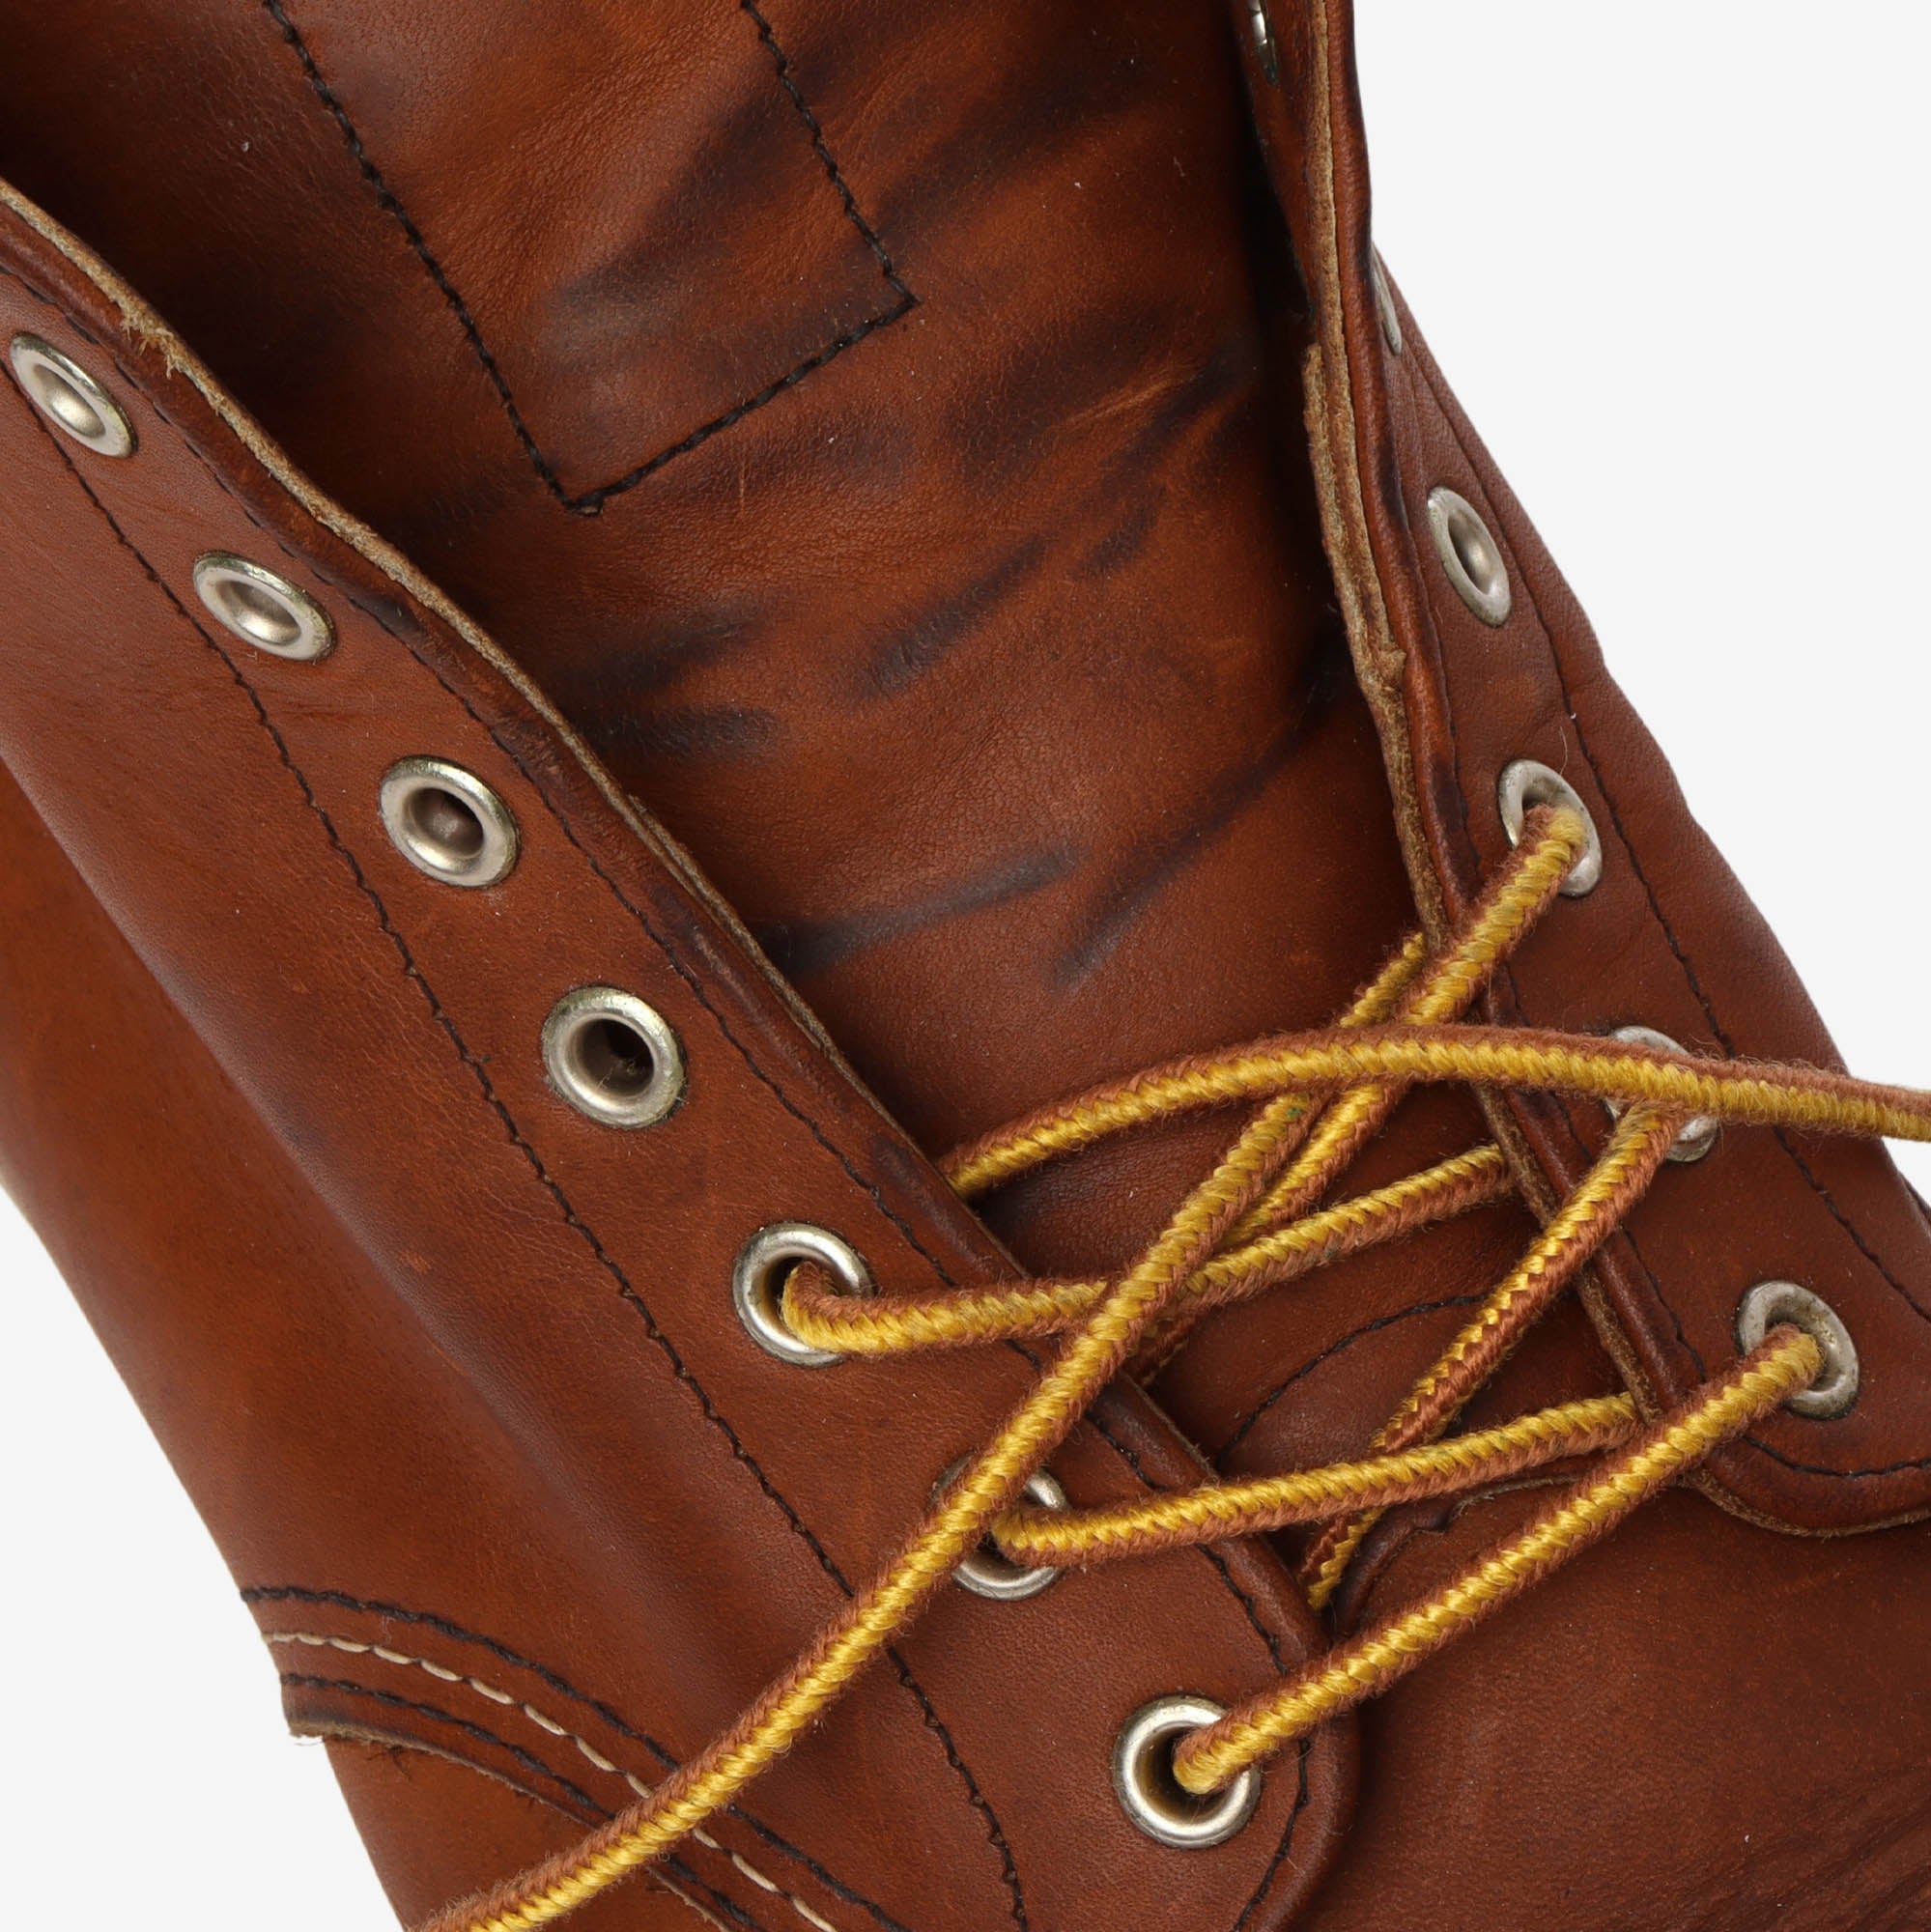 8822 Classic Round Toe Boots